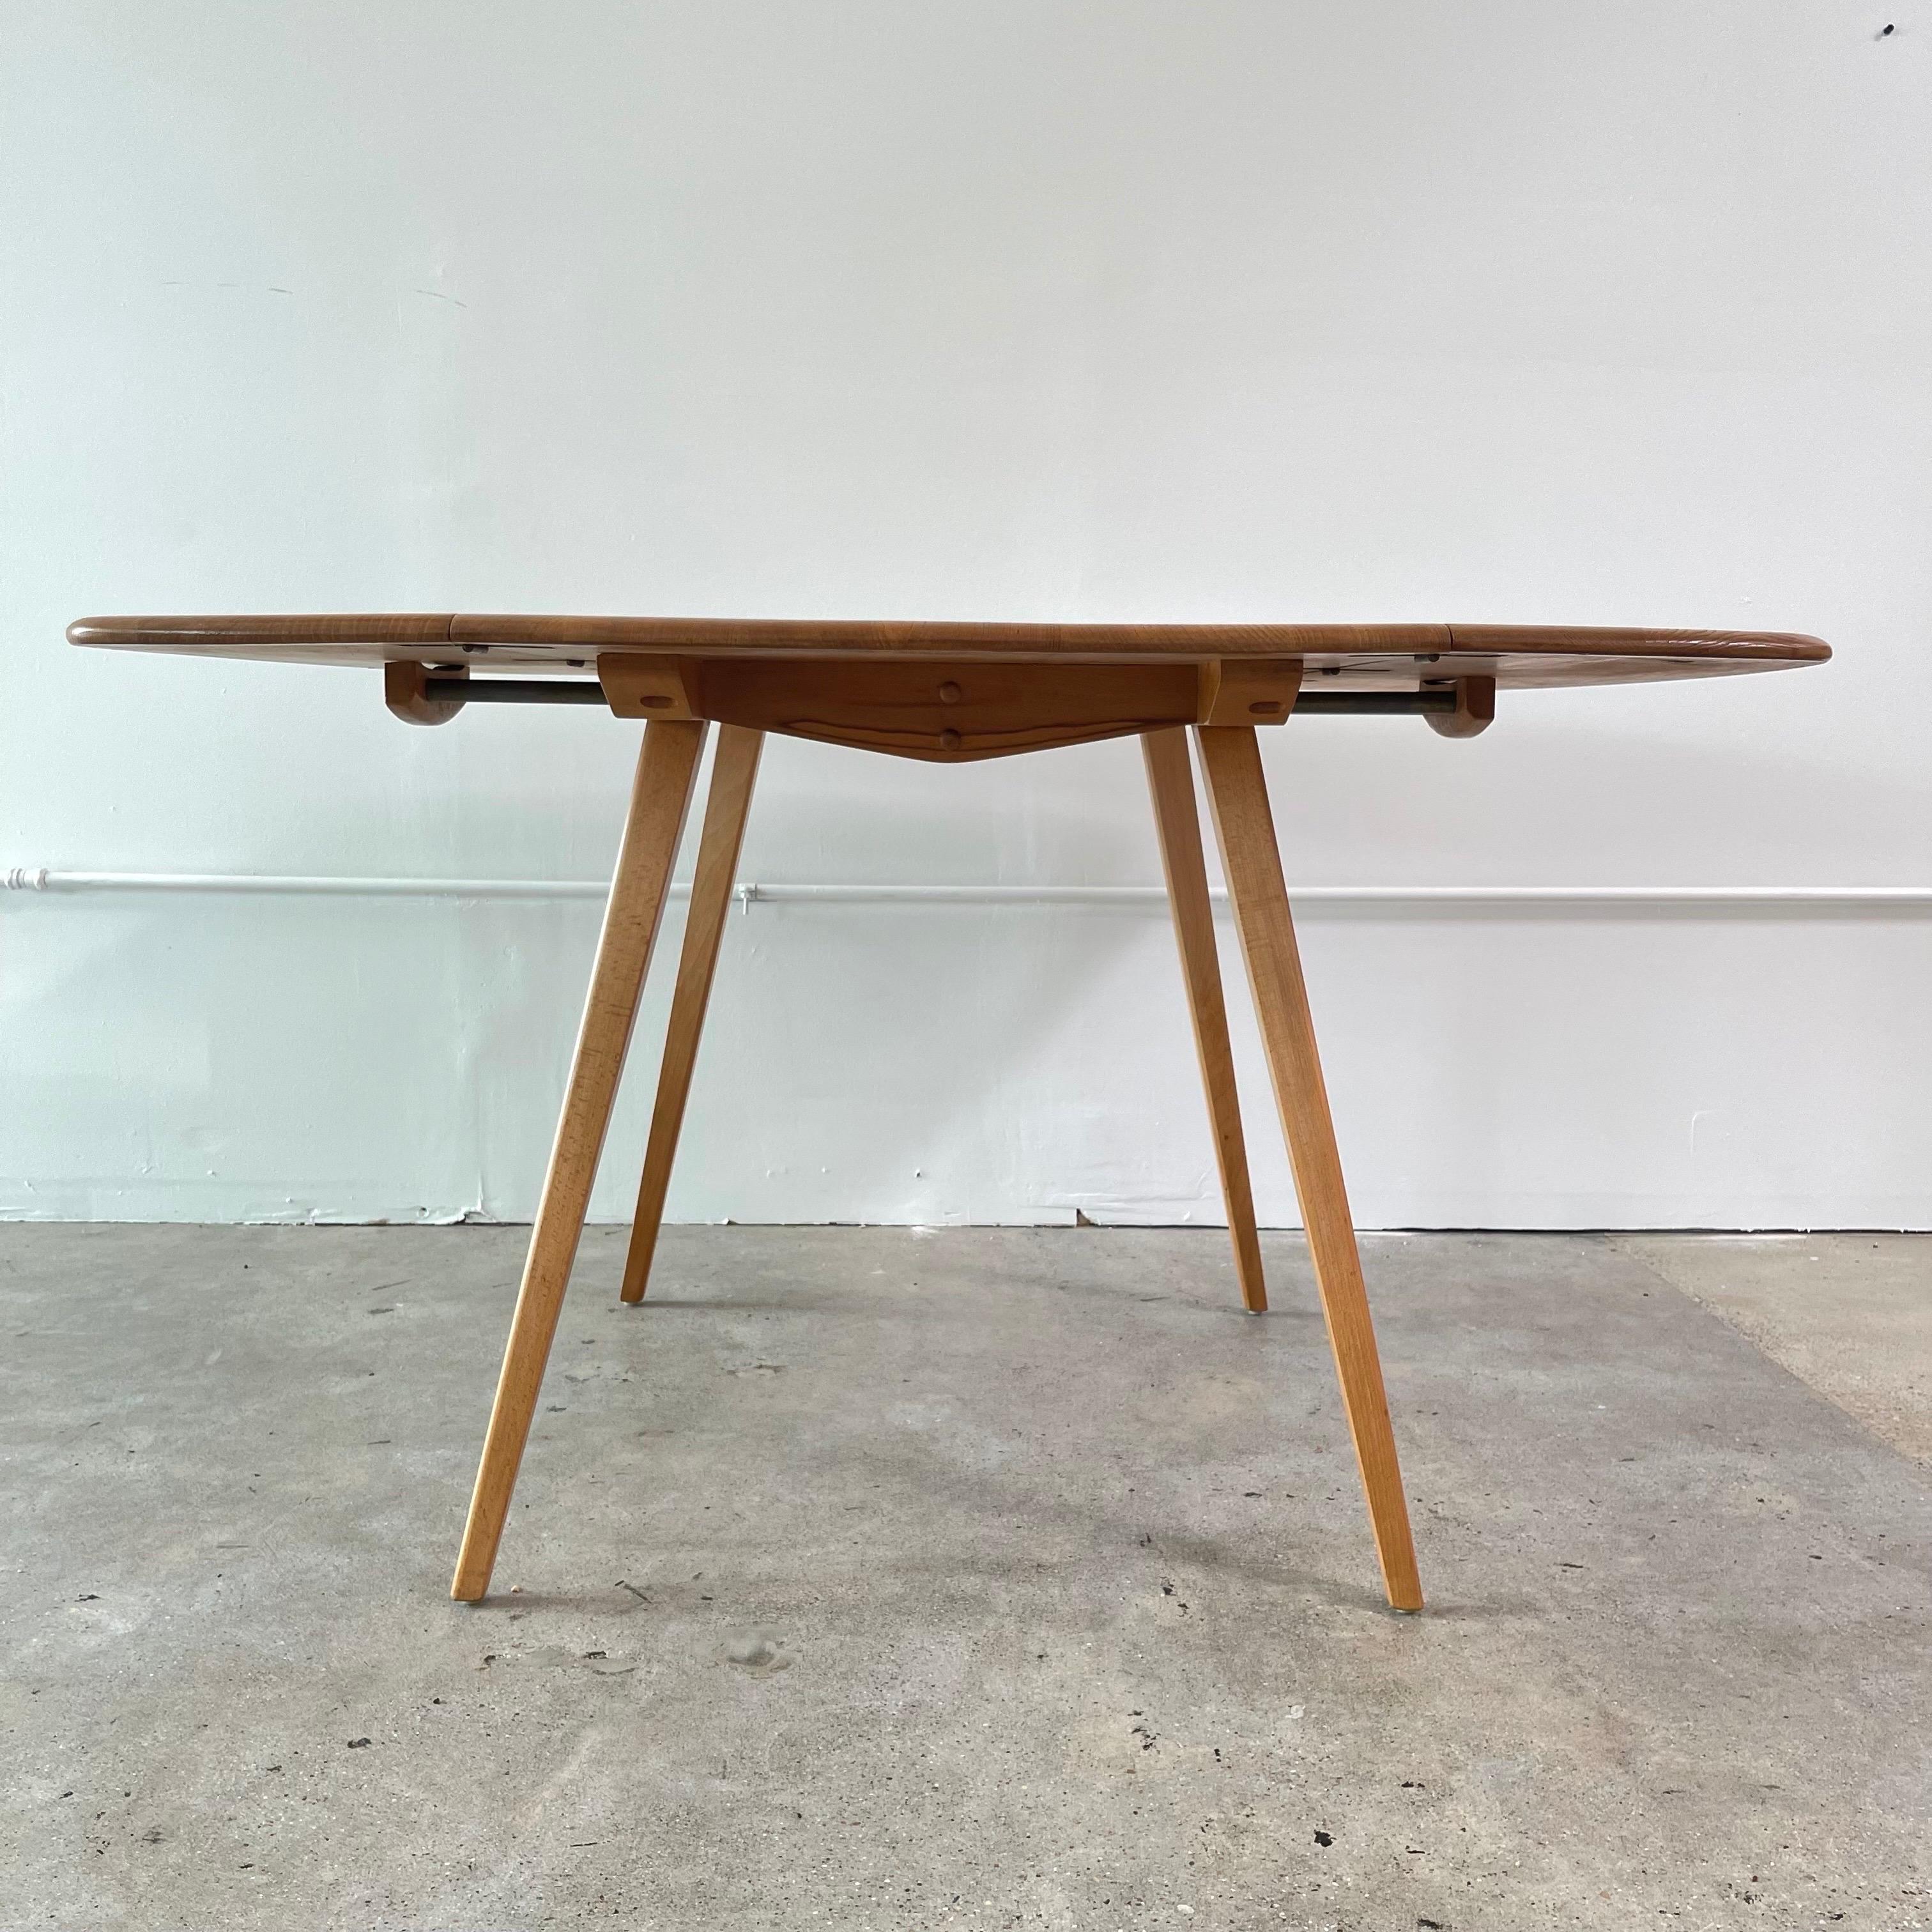 Solid elm drop leaf table with splayed legs made of beech wood. Made by Ercol in the 1960’s by Lucian Ercolani. Sharp angular legs contrast nicely with the soft corners of the table top.